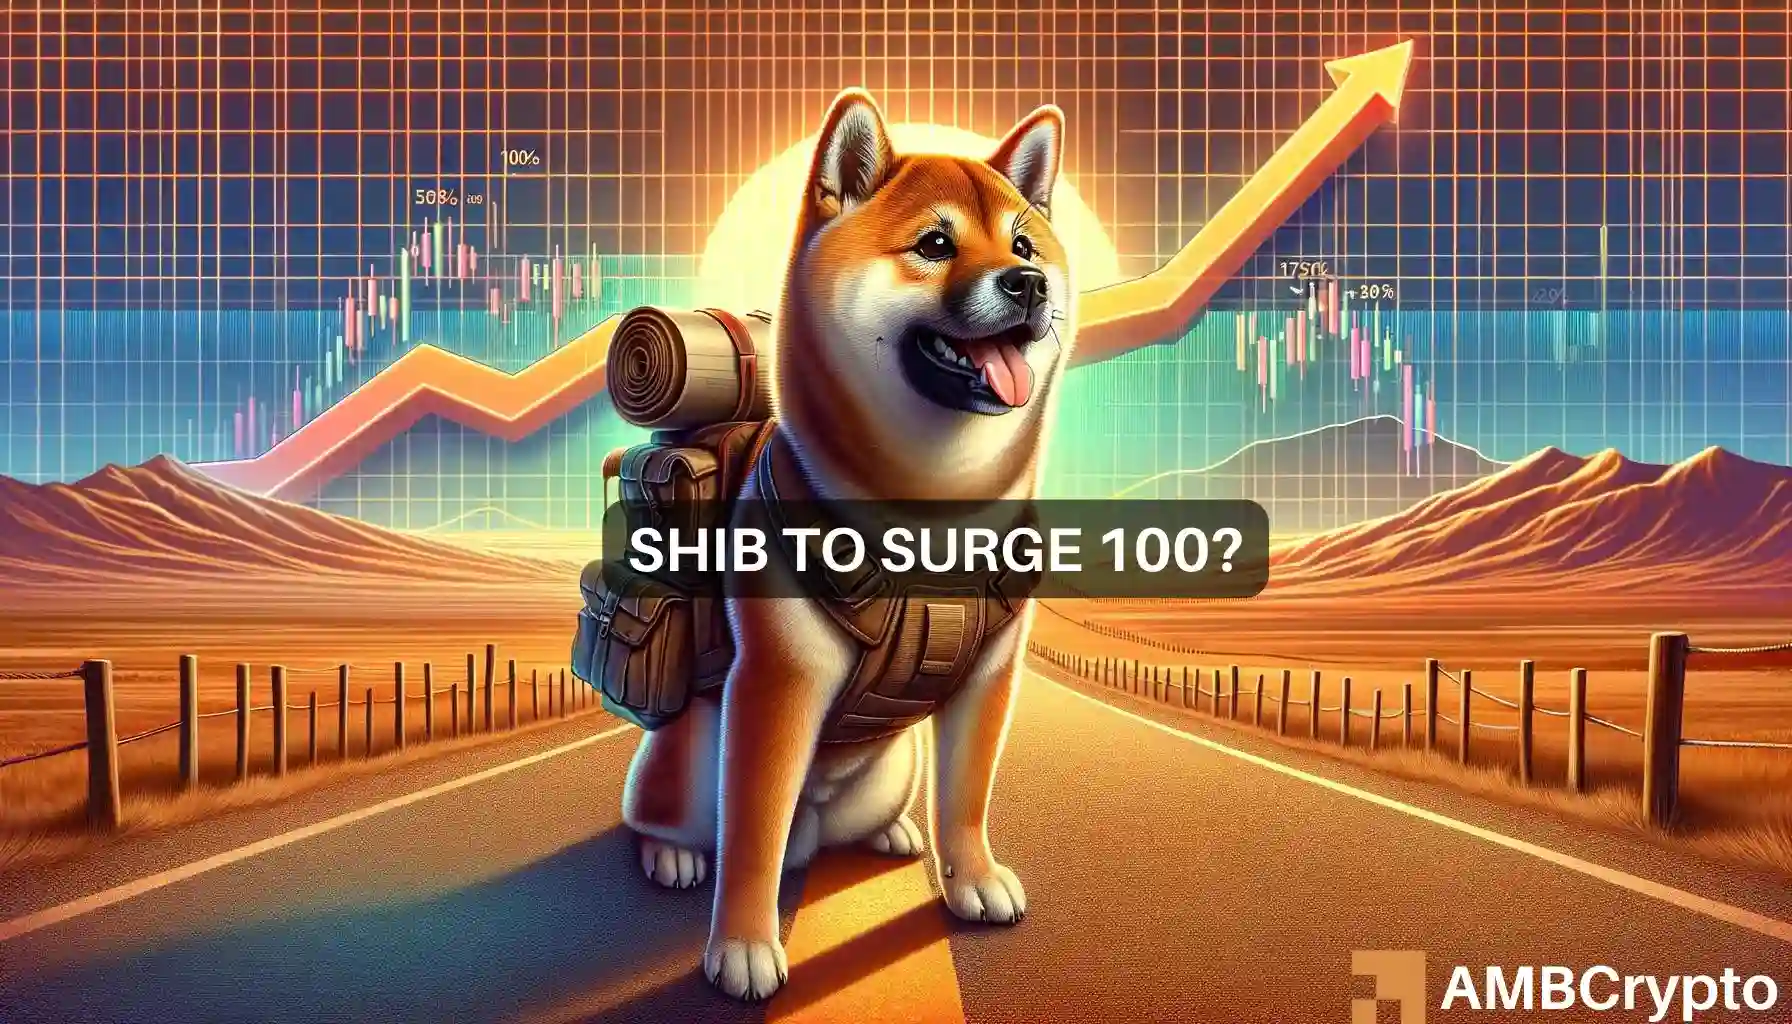 Shiba Inu coin – Here’s the roadmap for a 100% hike in SHIB’s price